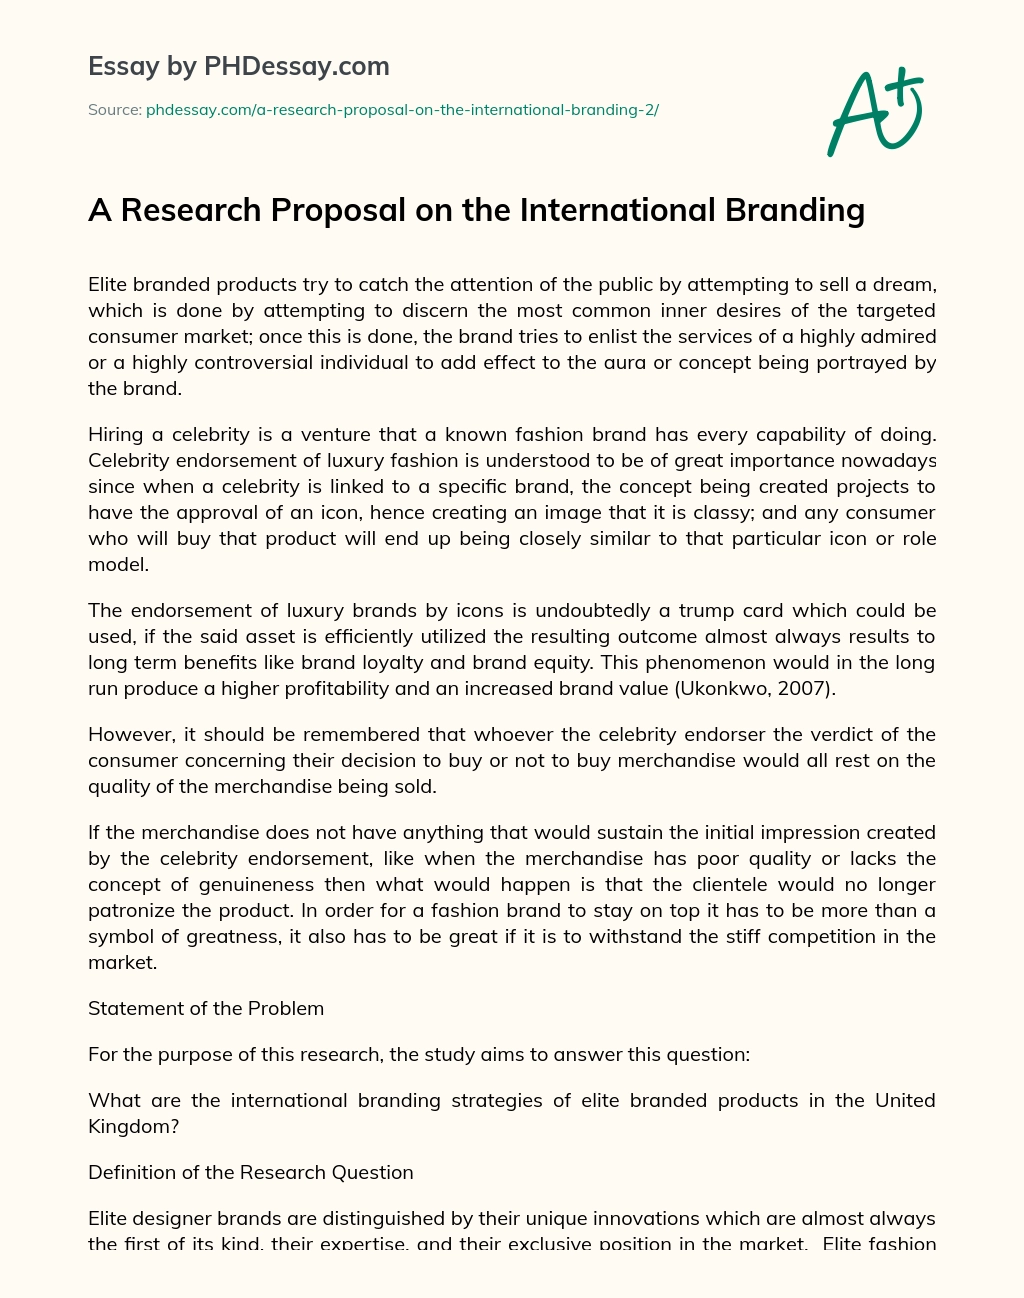 A Research Proposal on the International Branding